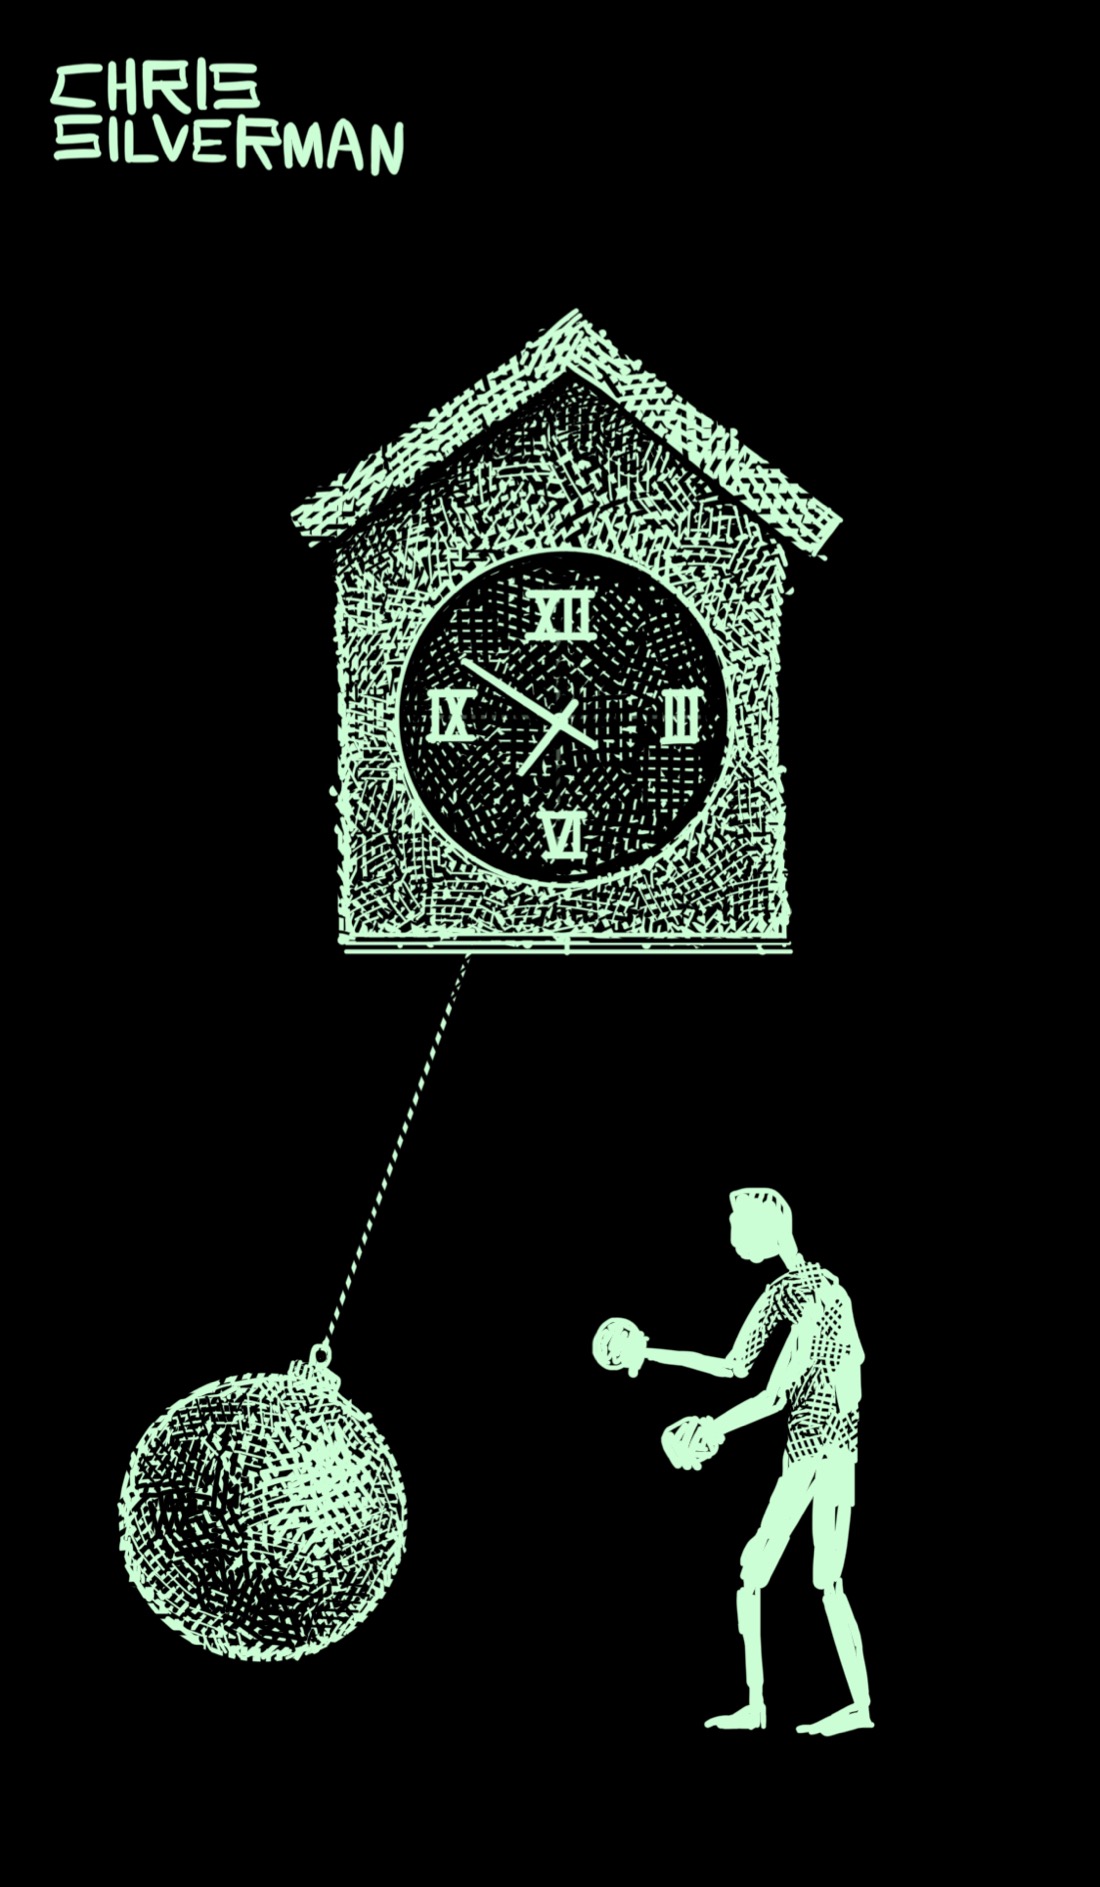 A cuckoo clock where the pendulum is a wrecking ball. The clock sits at the top of the drawing: a small square clock with Roman numerals displaying around 6:50 and a pointed roof. The wrecking ball has swung the left and is preparing to swing back to the right. At the right of the drawing is a small figure wearing boxing gloves, posed in a boxing stance, preparing to punch the pendulum like a punching bag. These are pale green lines on a black background.